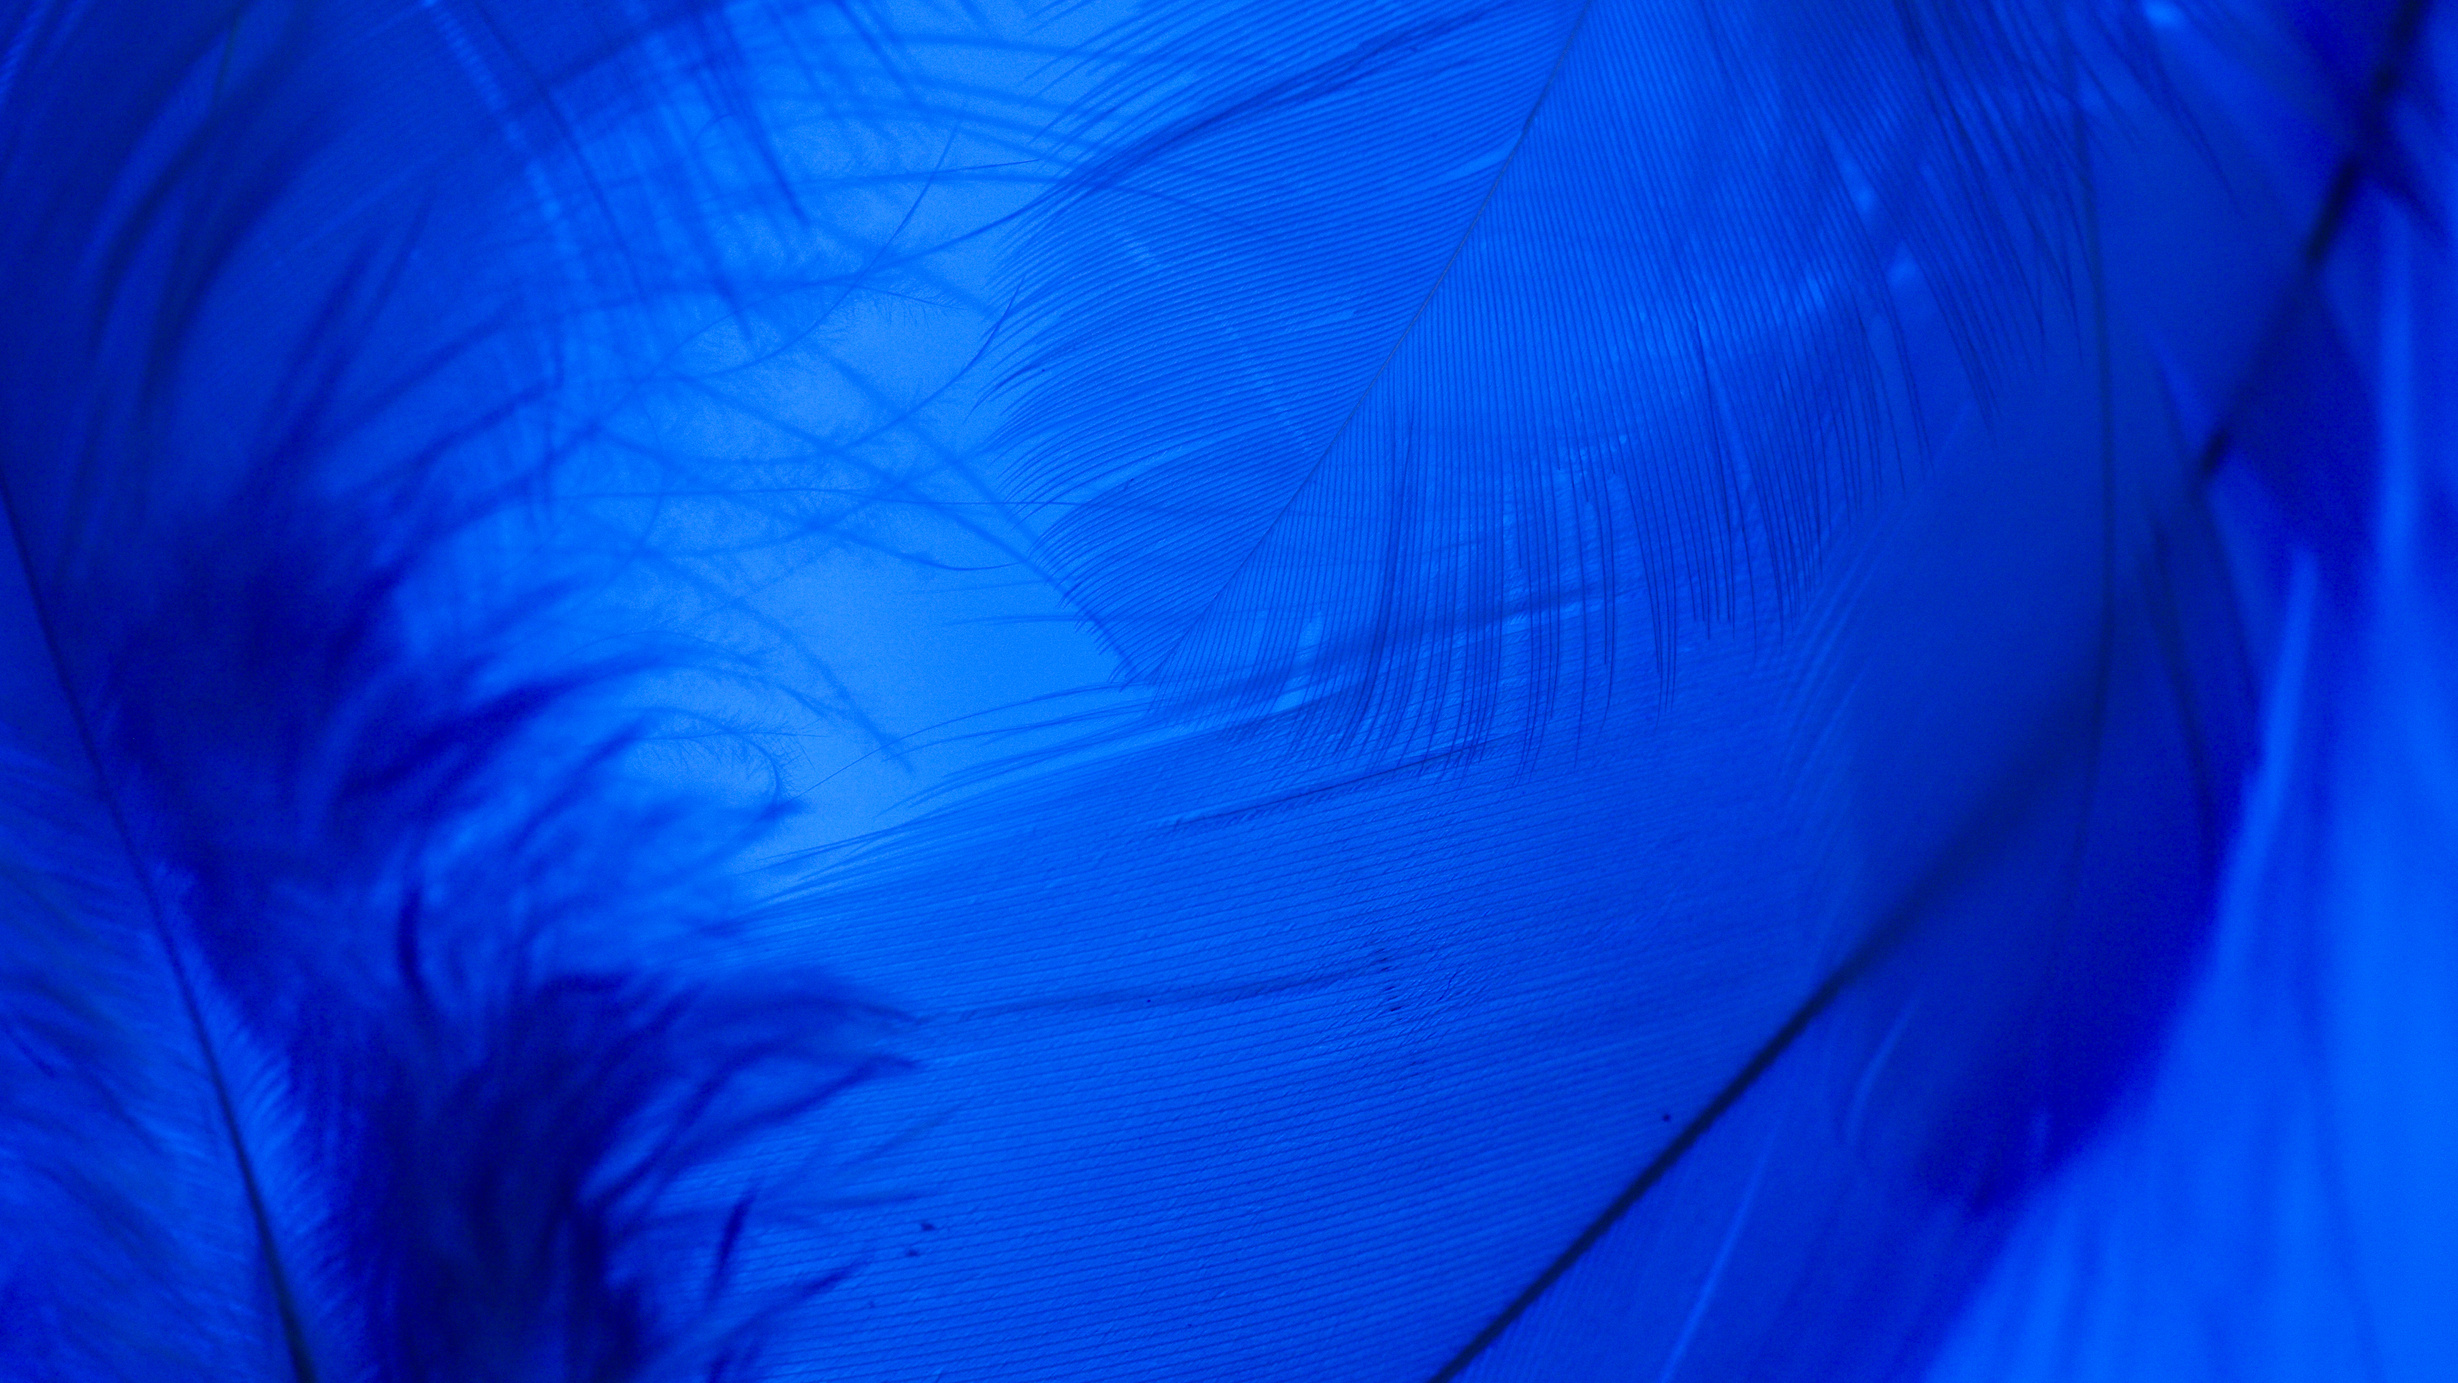 Feathers on the Blue Background